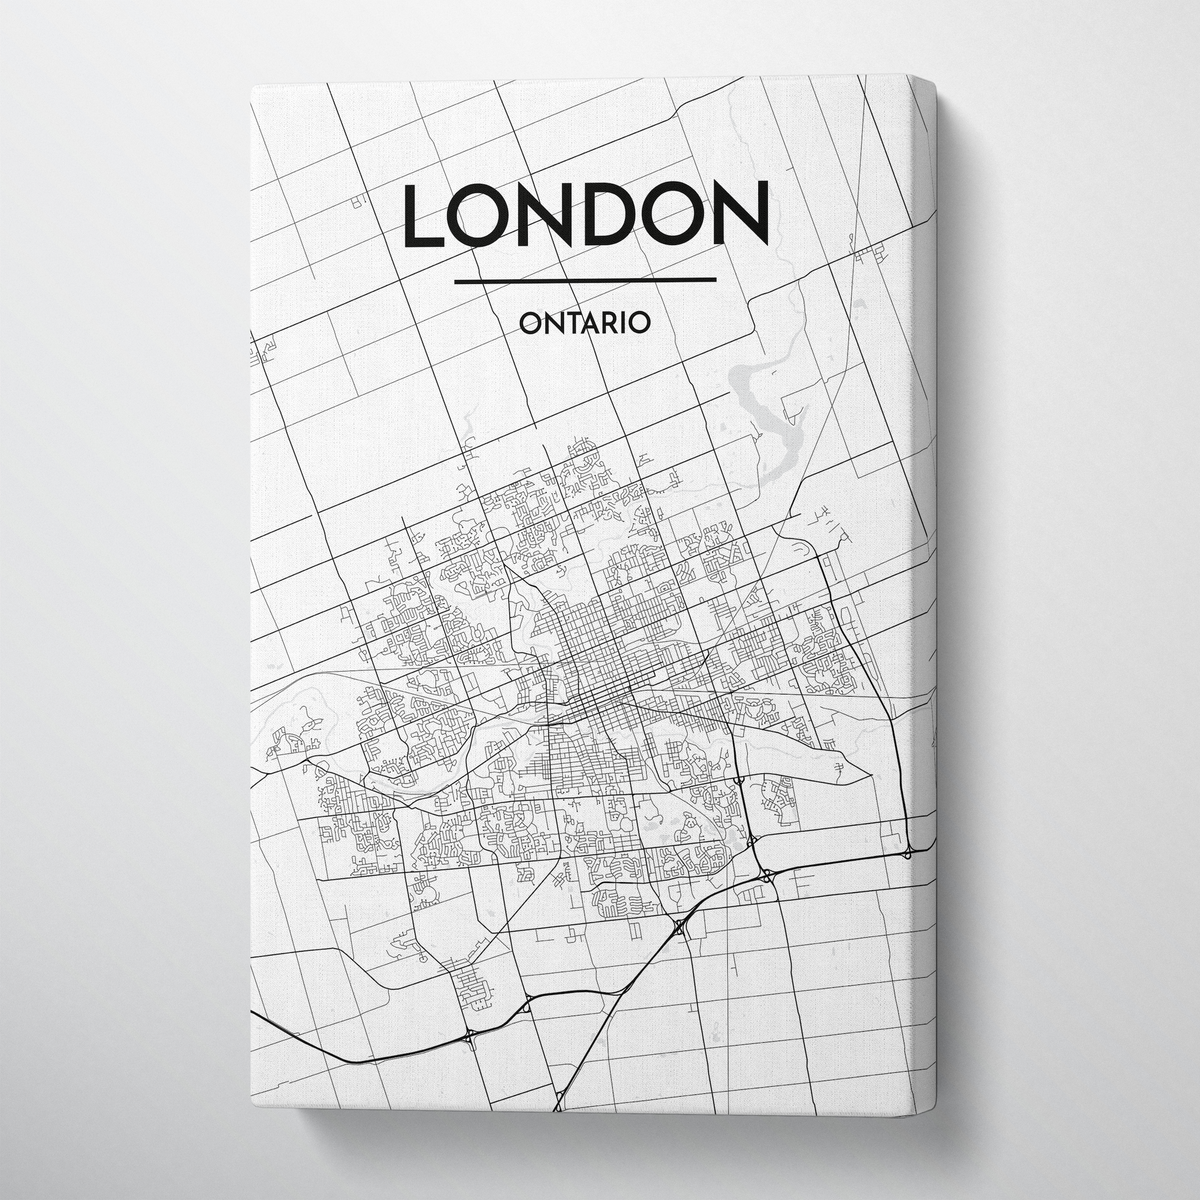 London Ontario City Map Canvas Wrap - Point Two Design - Black and White